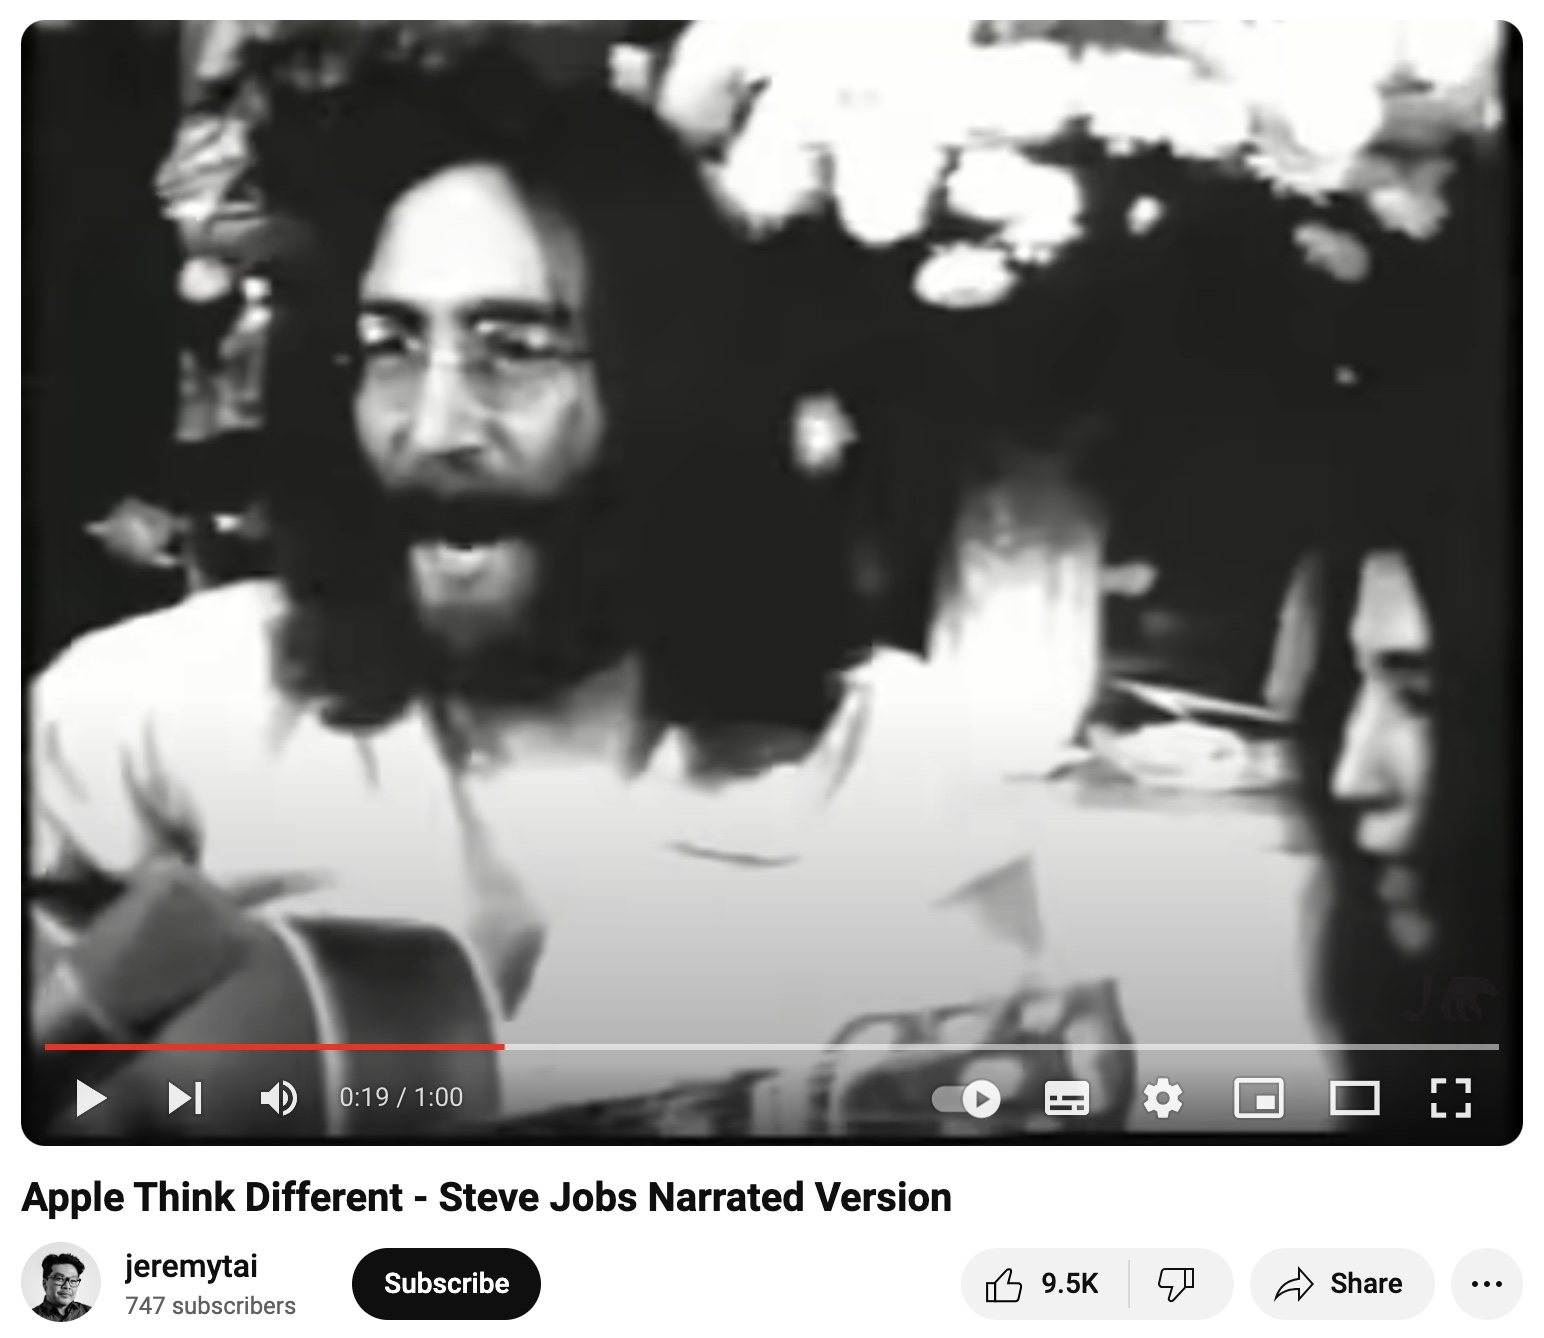 A screenshot from the Apple's "Think Different" video